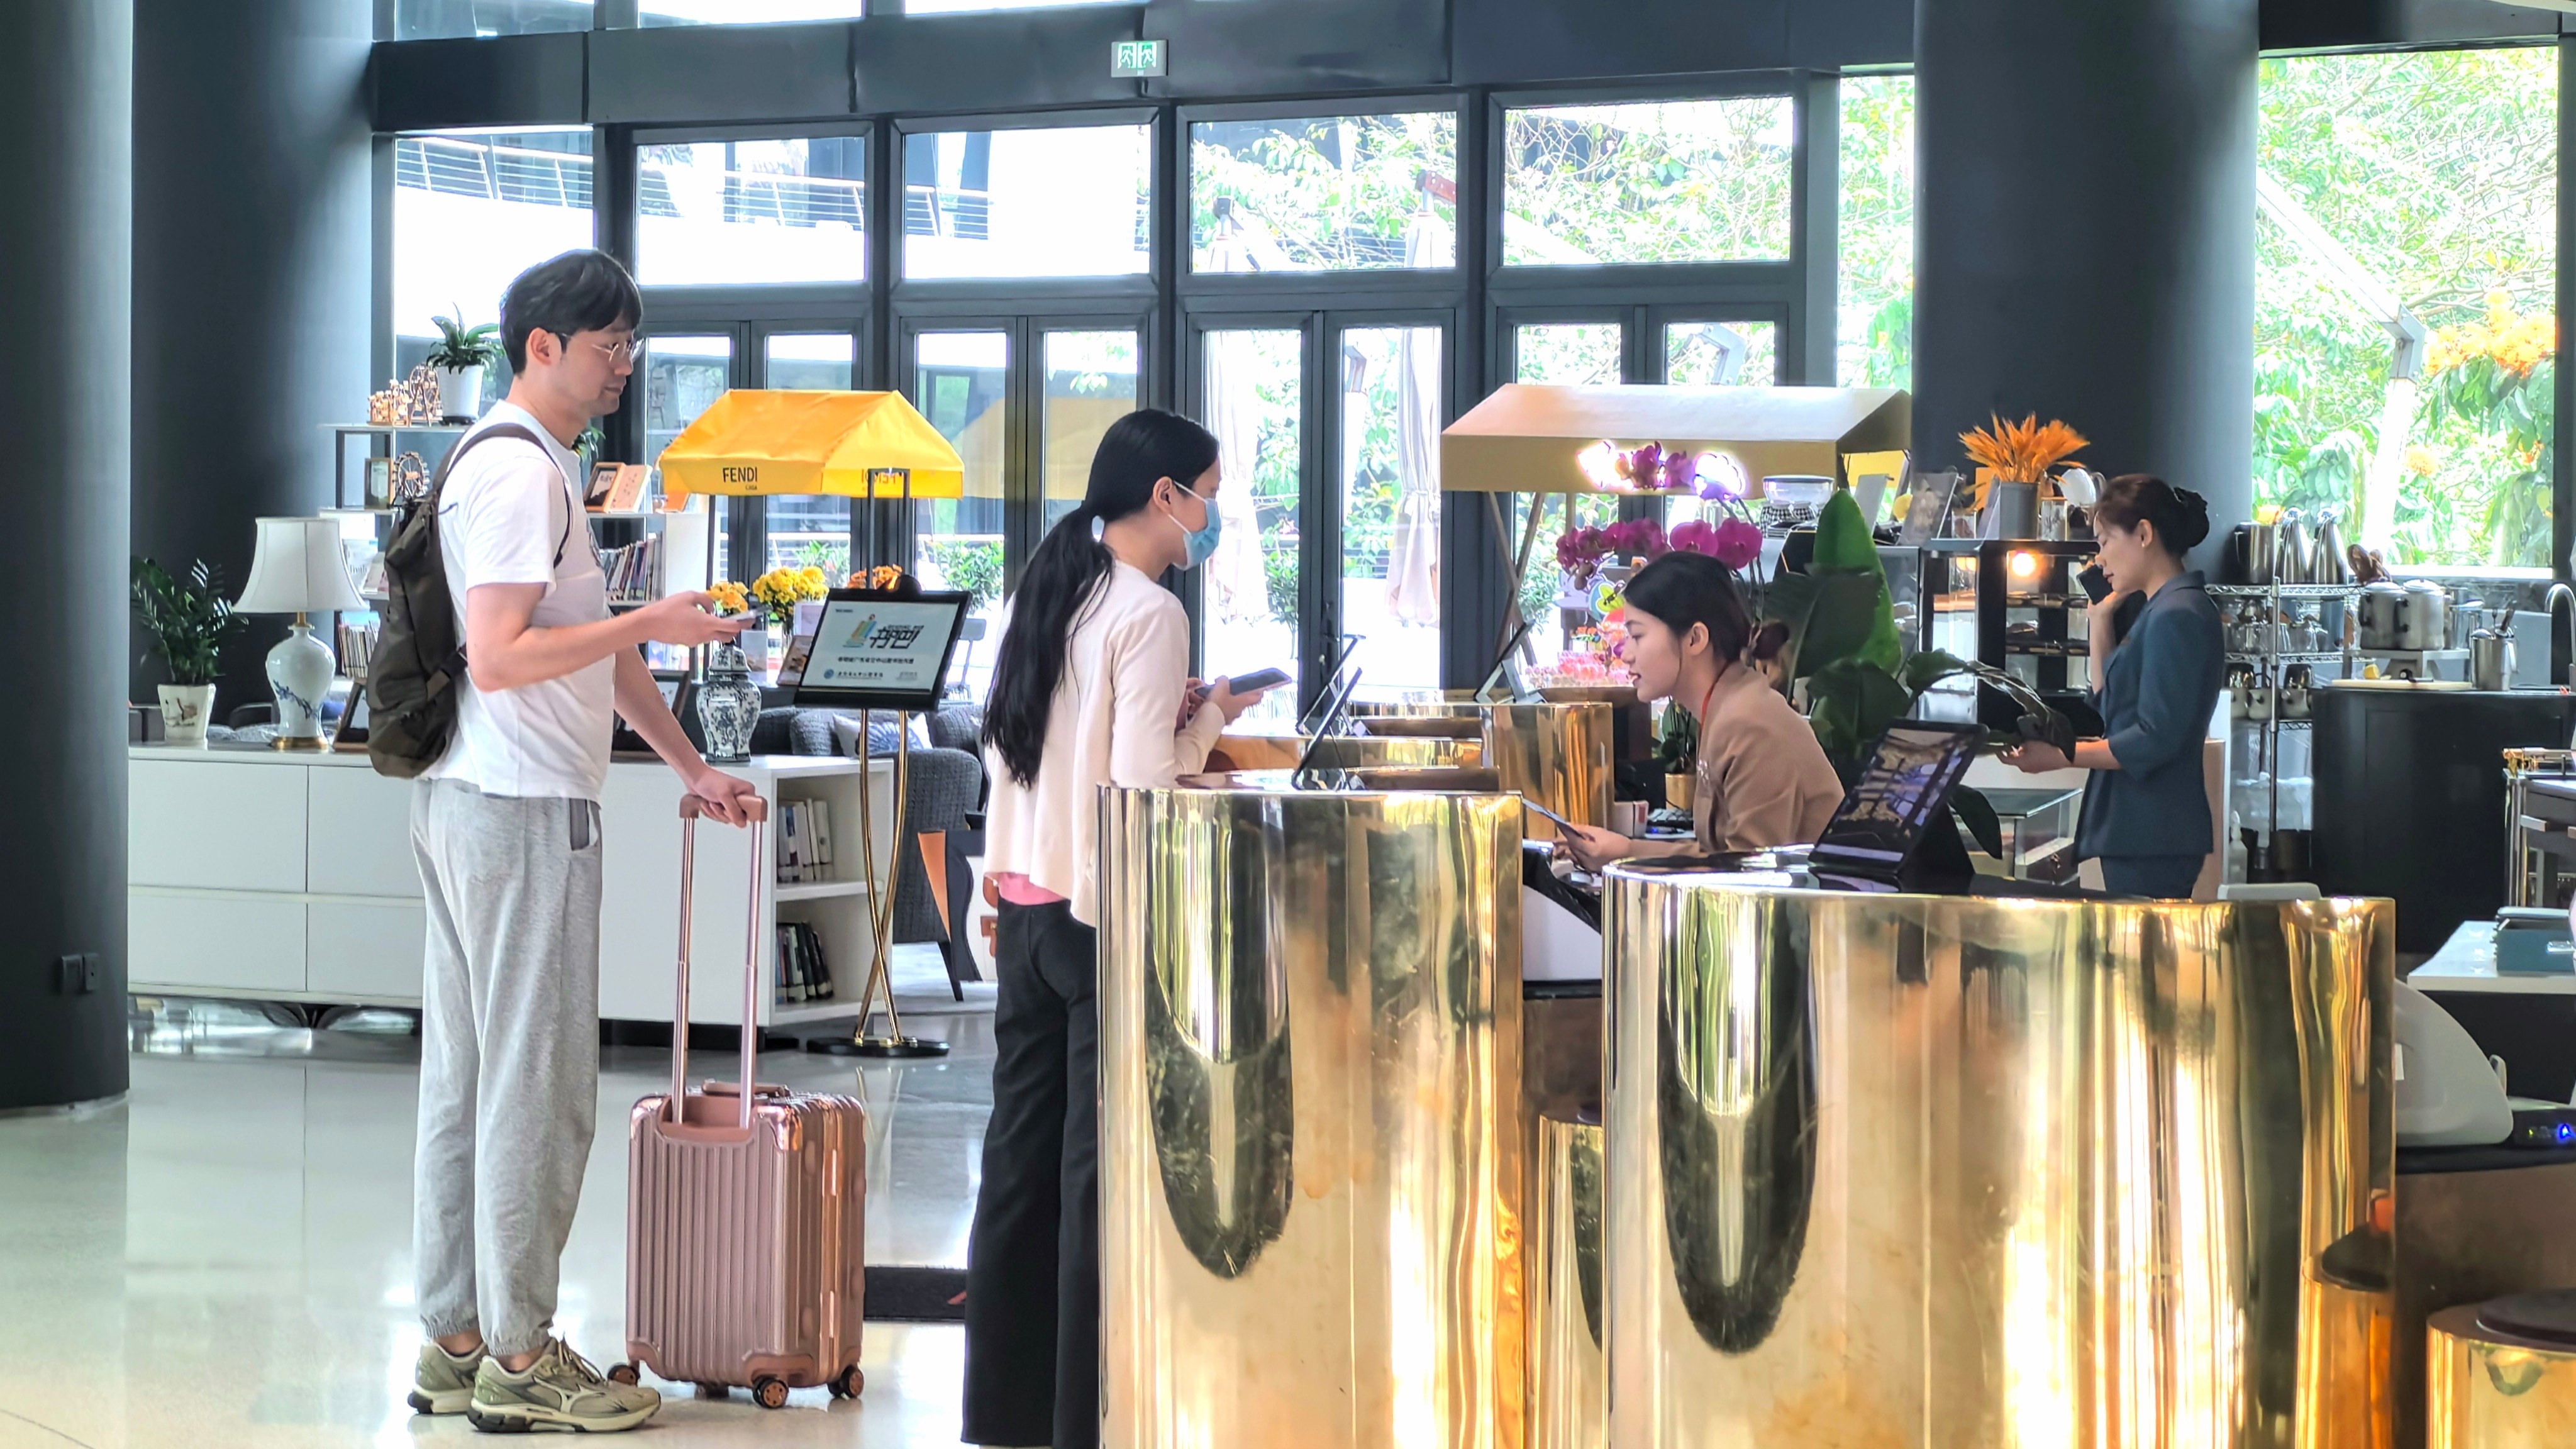 No more 'face-scanning' for hotel check-ins in Guangzhou